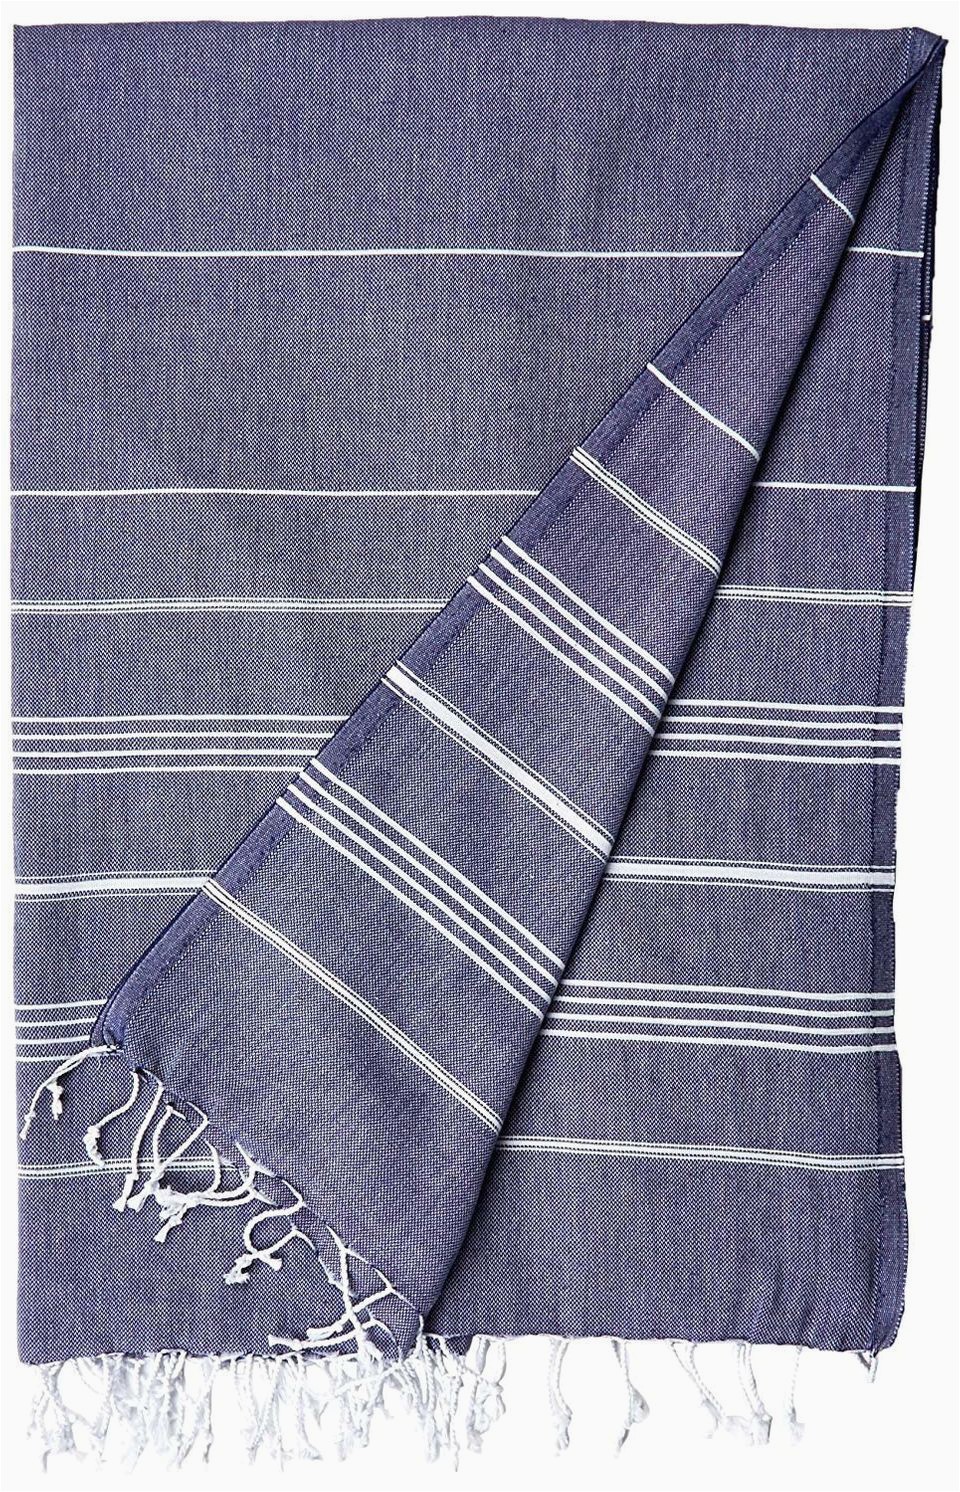 Shique Turkish Bath Rug Collection 10 the Highest Rated Turkish towels Amazon